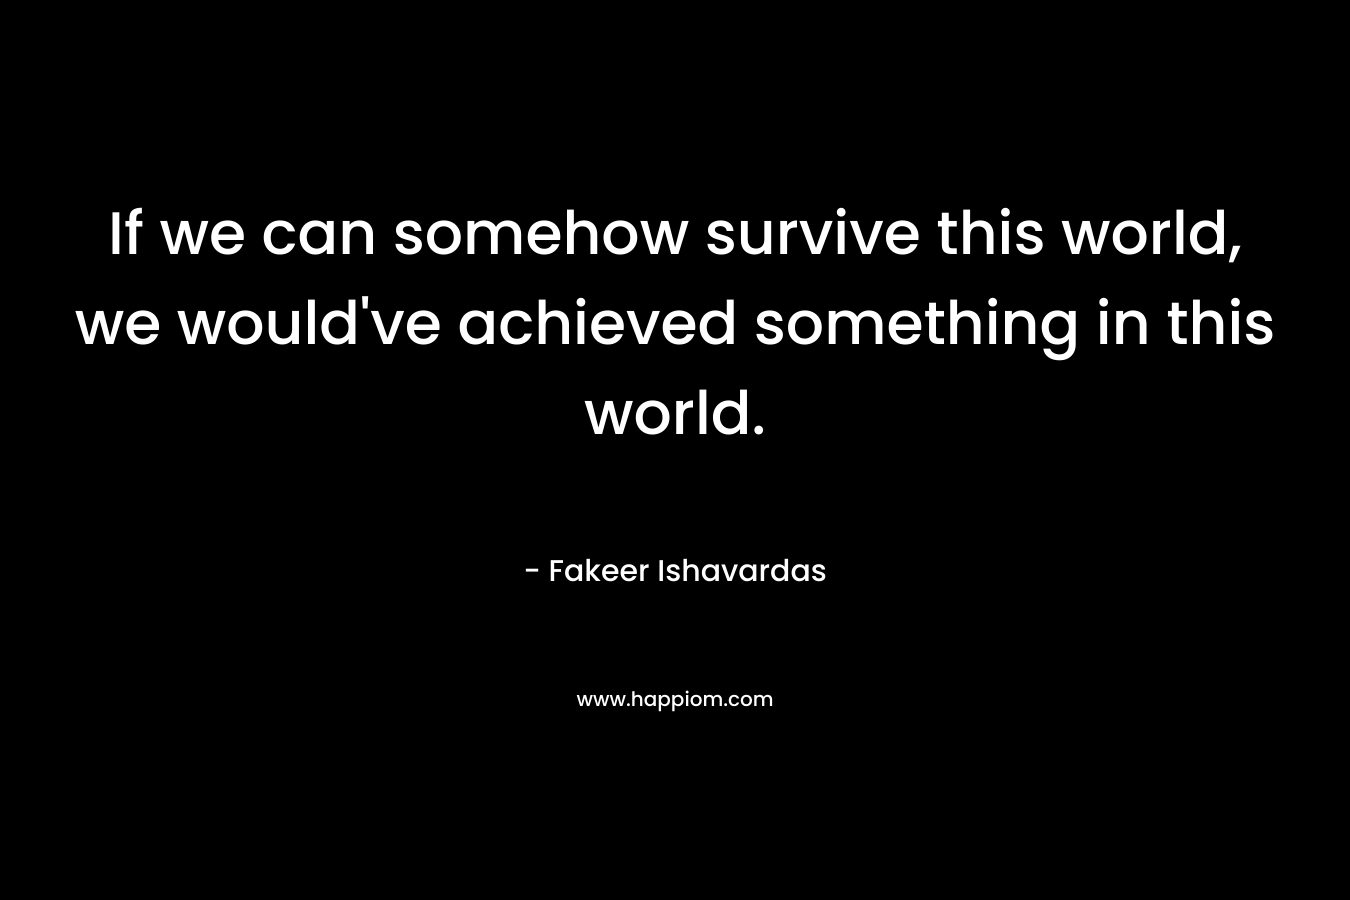 If we can somehow survive this world, we would've achieved something in this world.